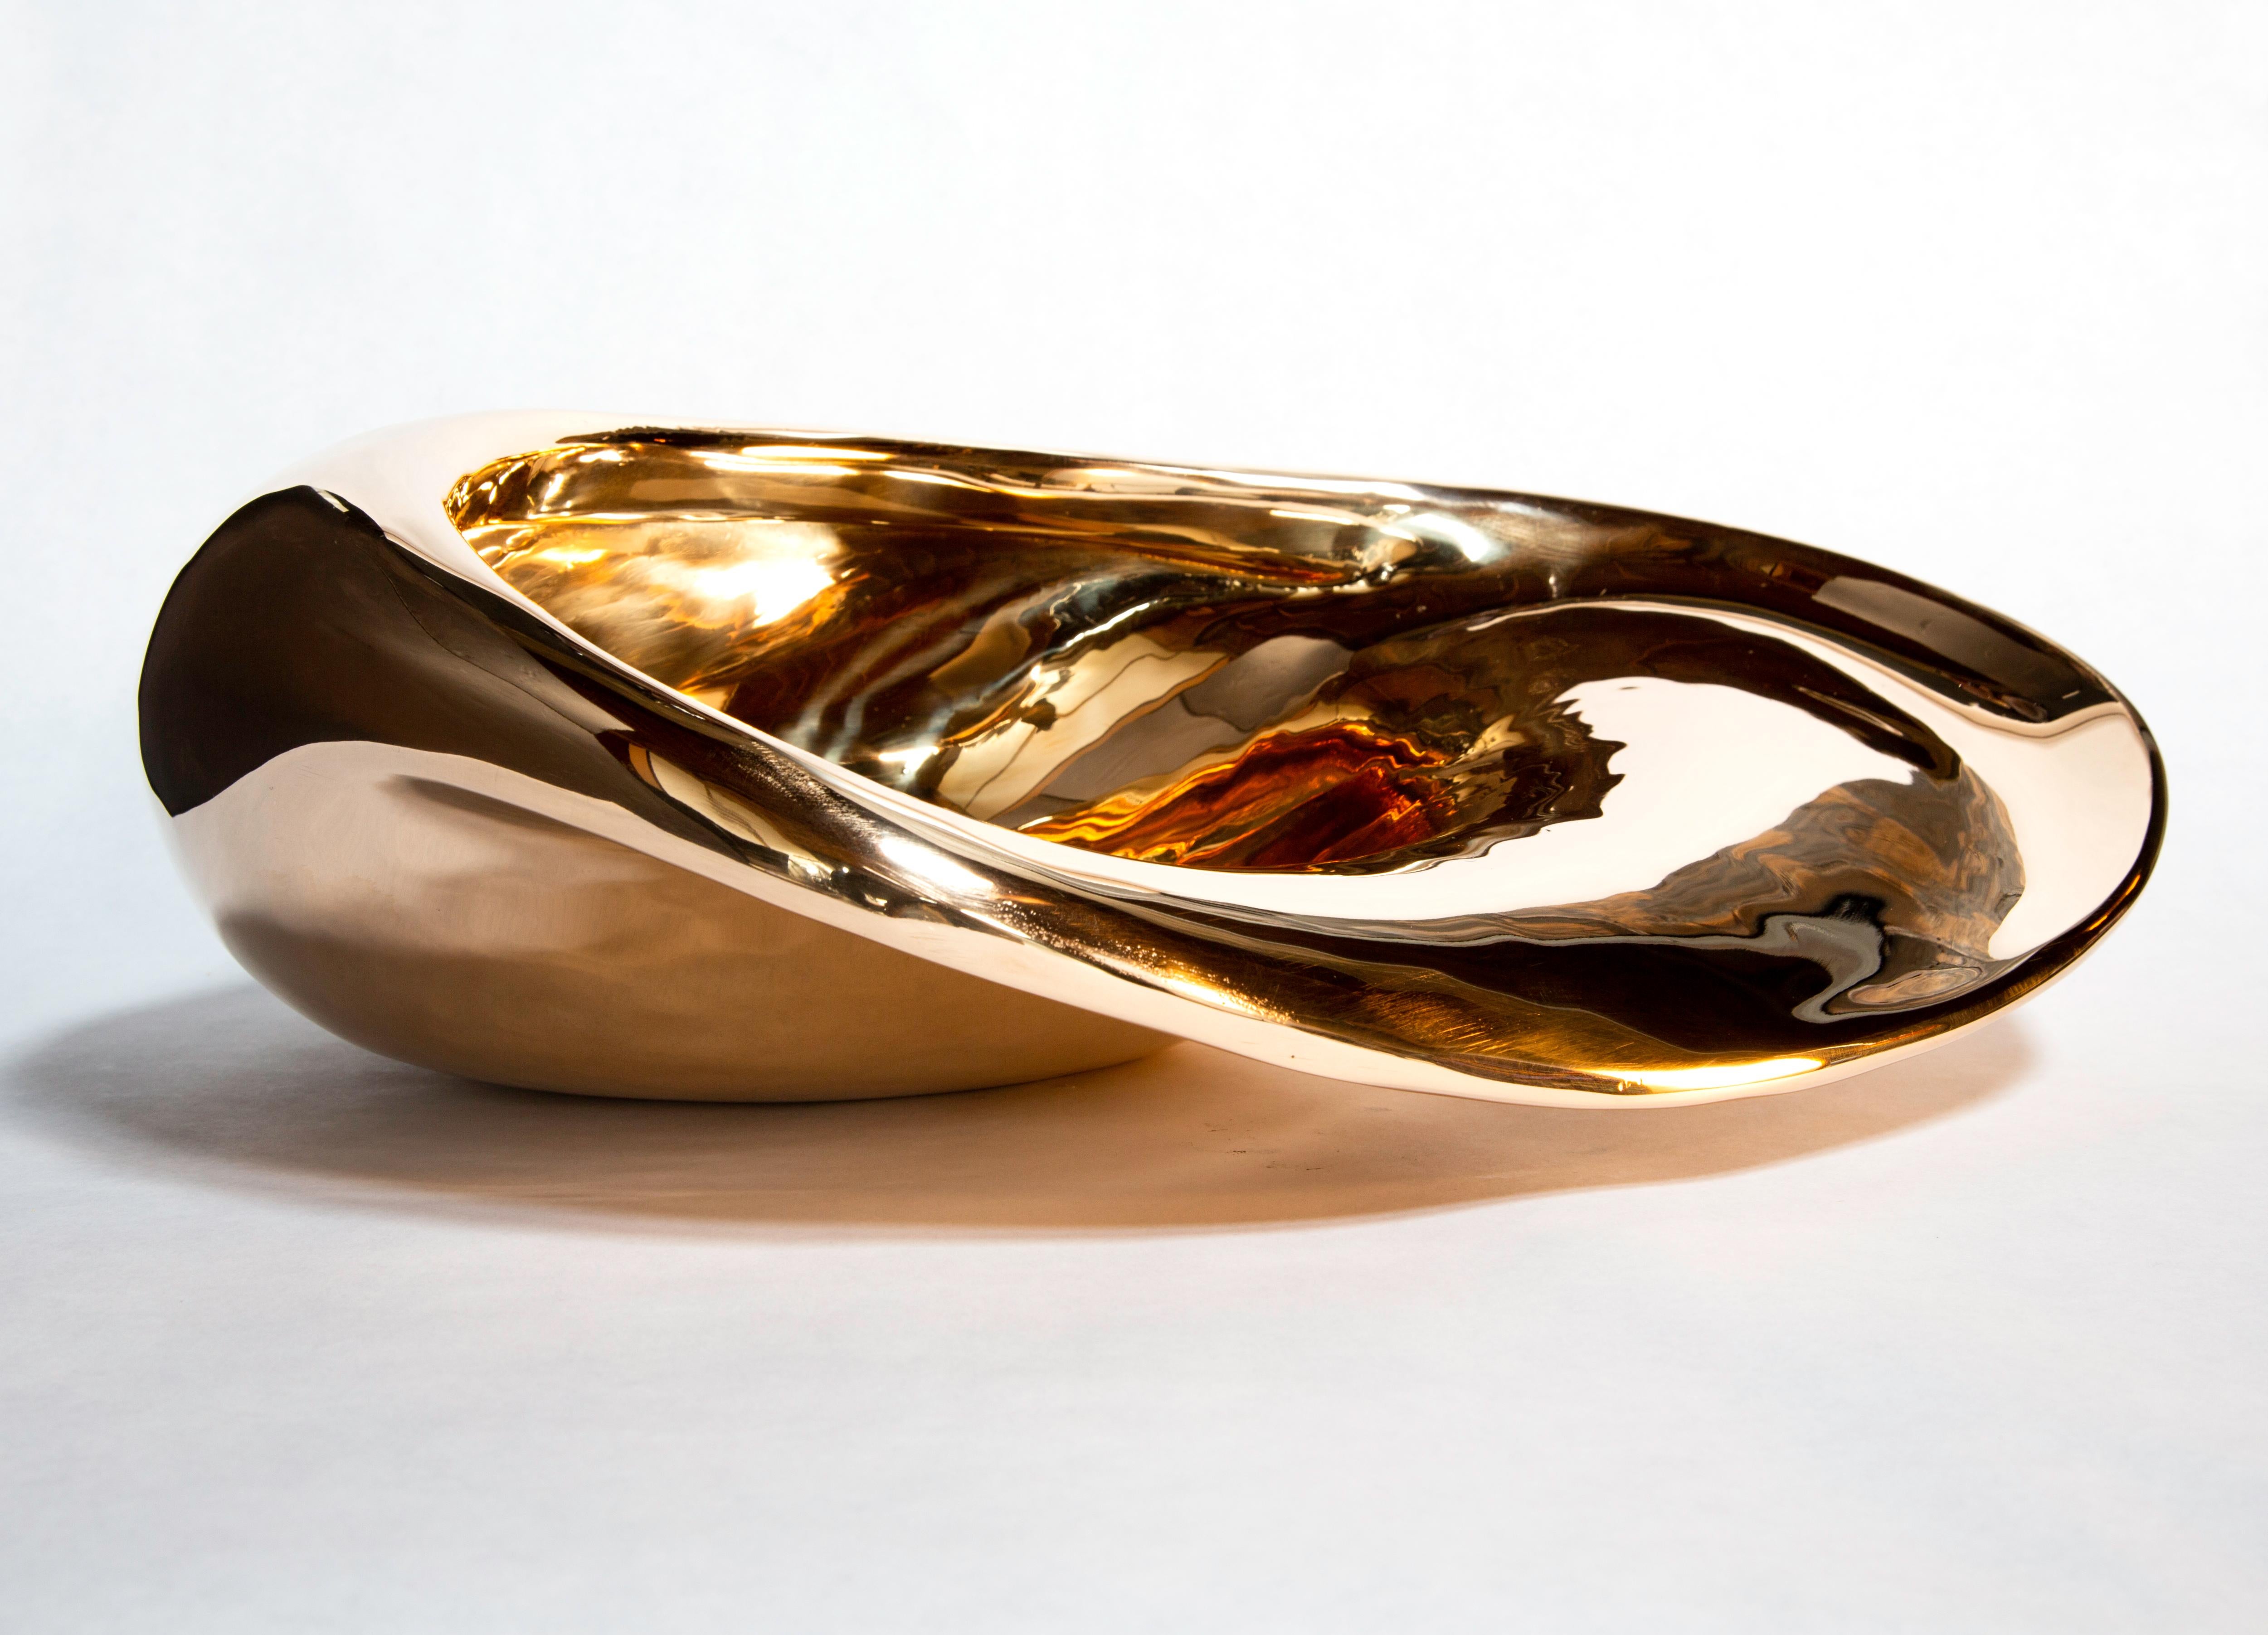 Contemporary H57 Bowl / Vase in Polished Recycled Cast Aluminum, by Jordan Mozer, USA, 2007 For Sale